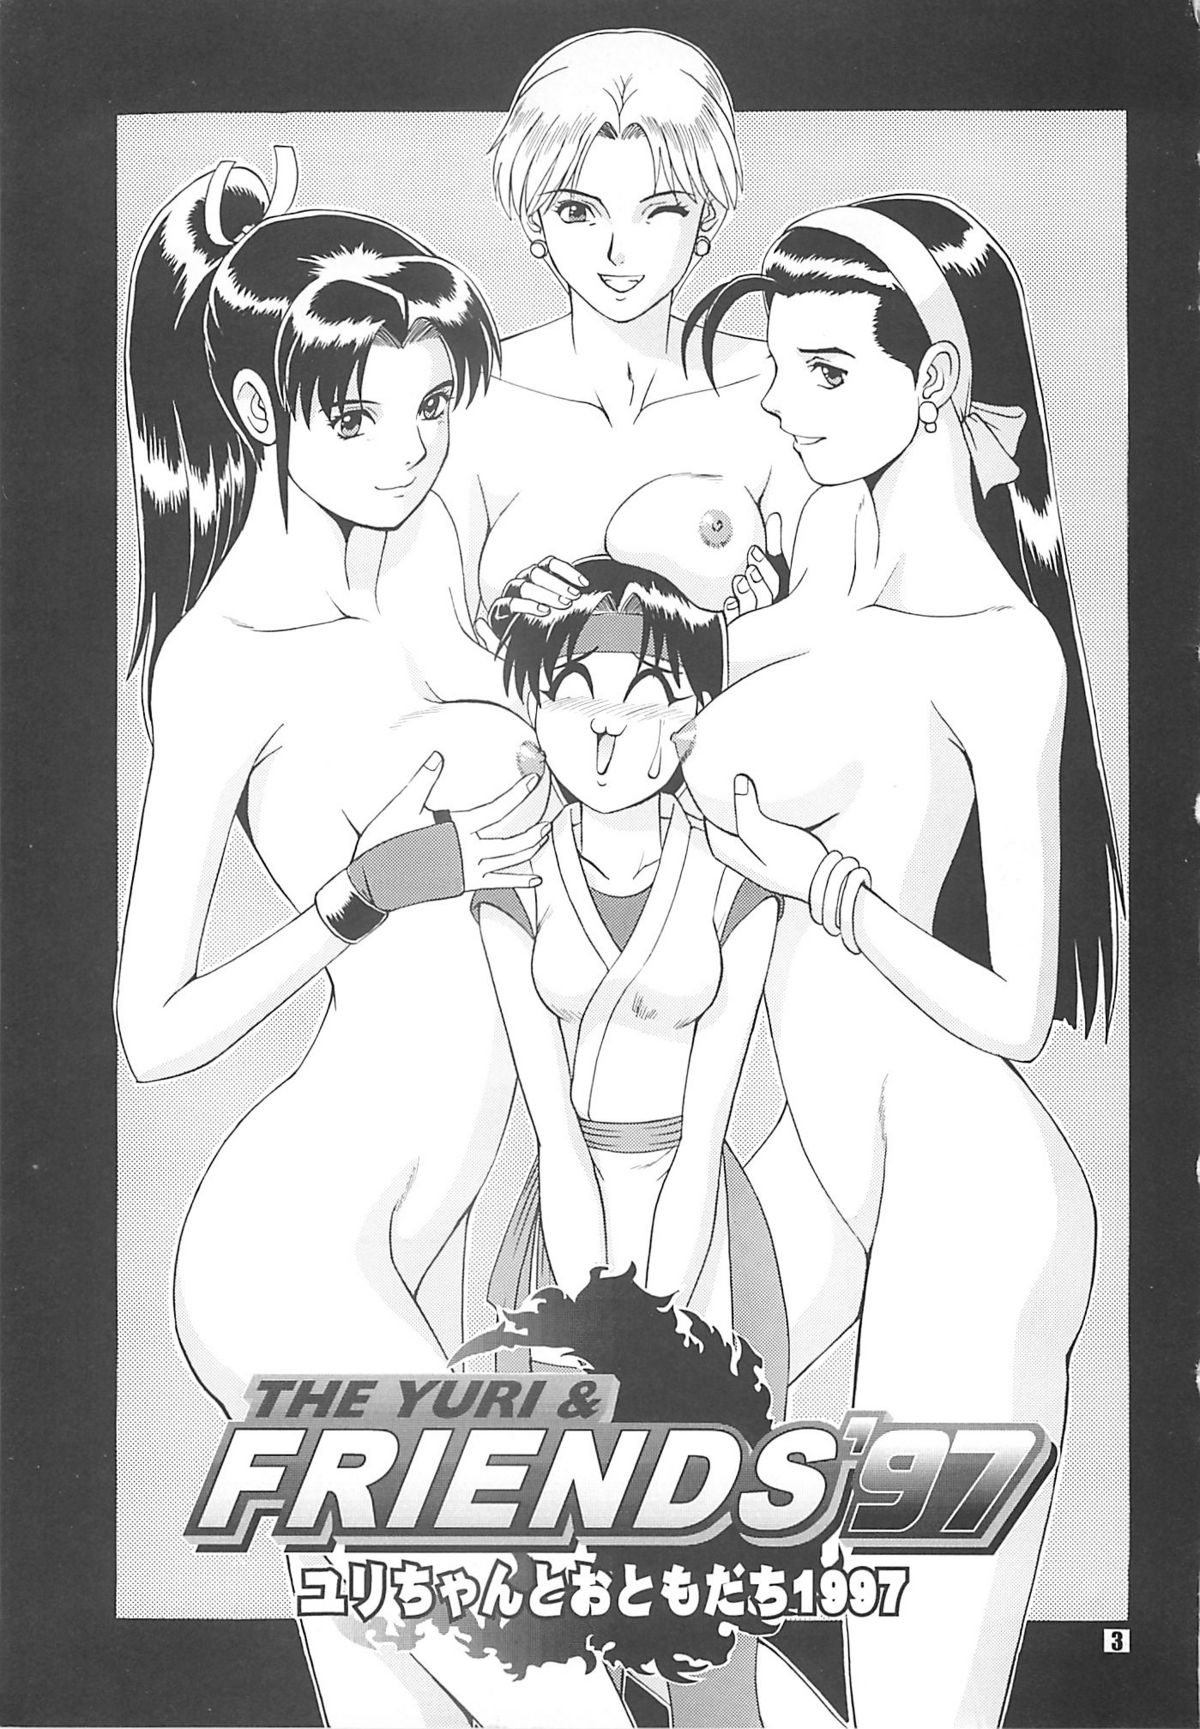 (CR22) [Saigado (Ishoku Dougen)] The Yuri & Friends '97 (King of Fighters) page 2 full